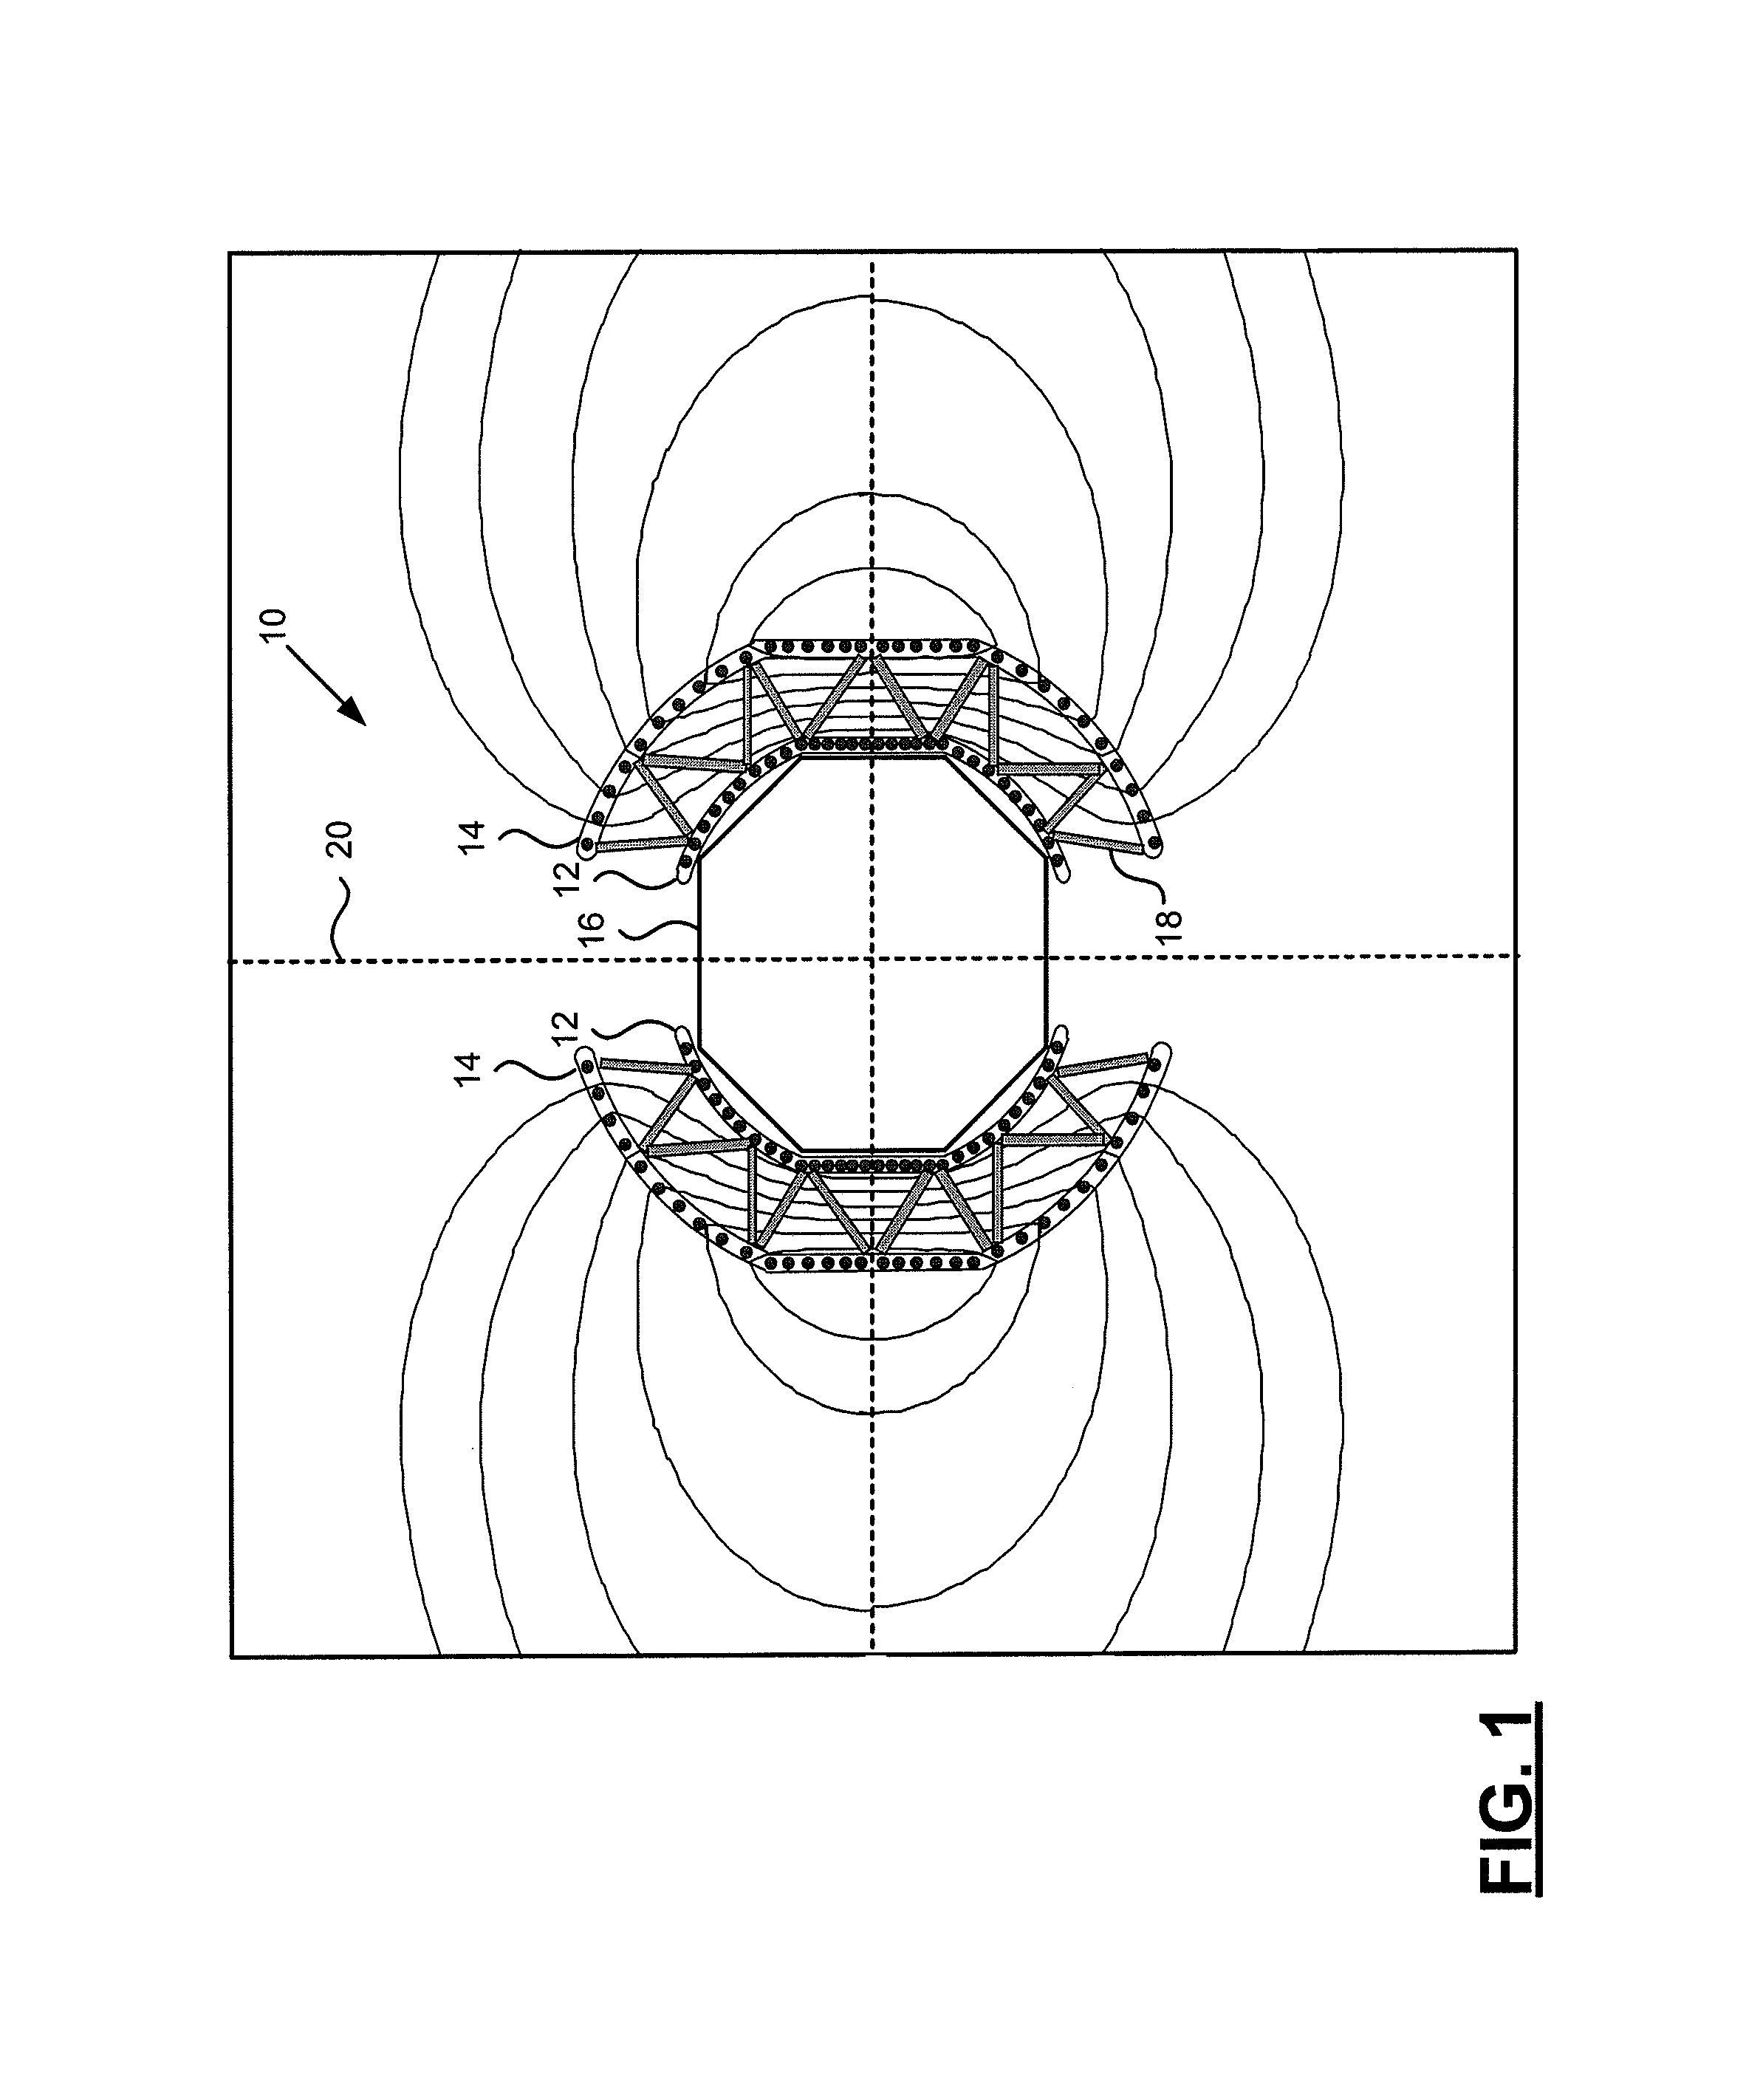 Radiation shield device and associated method